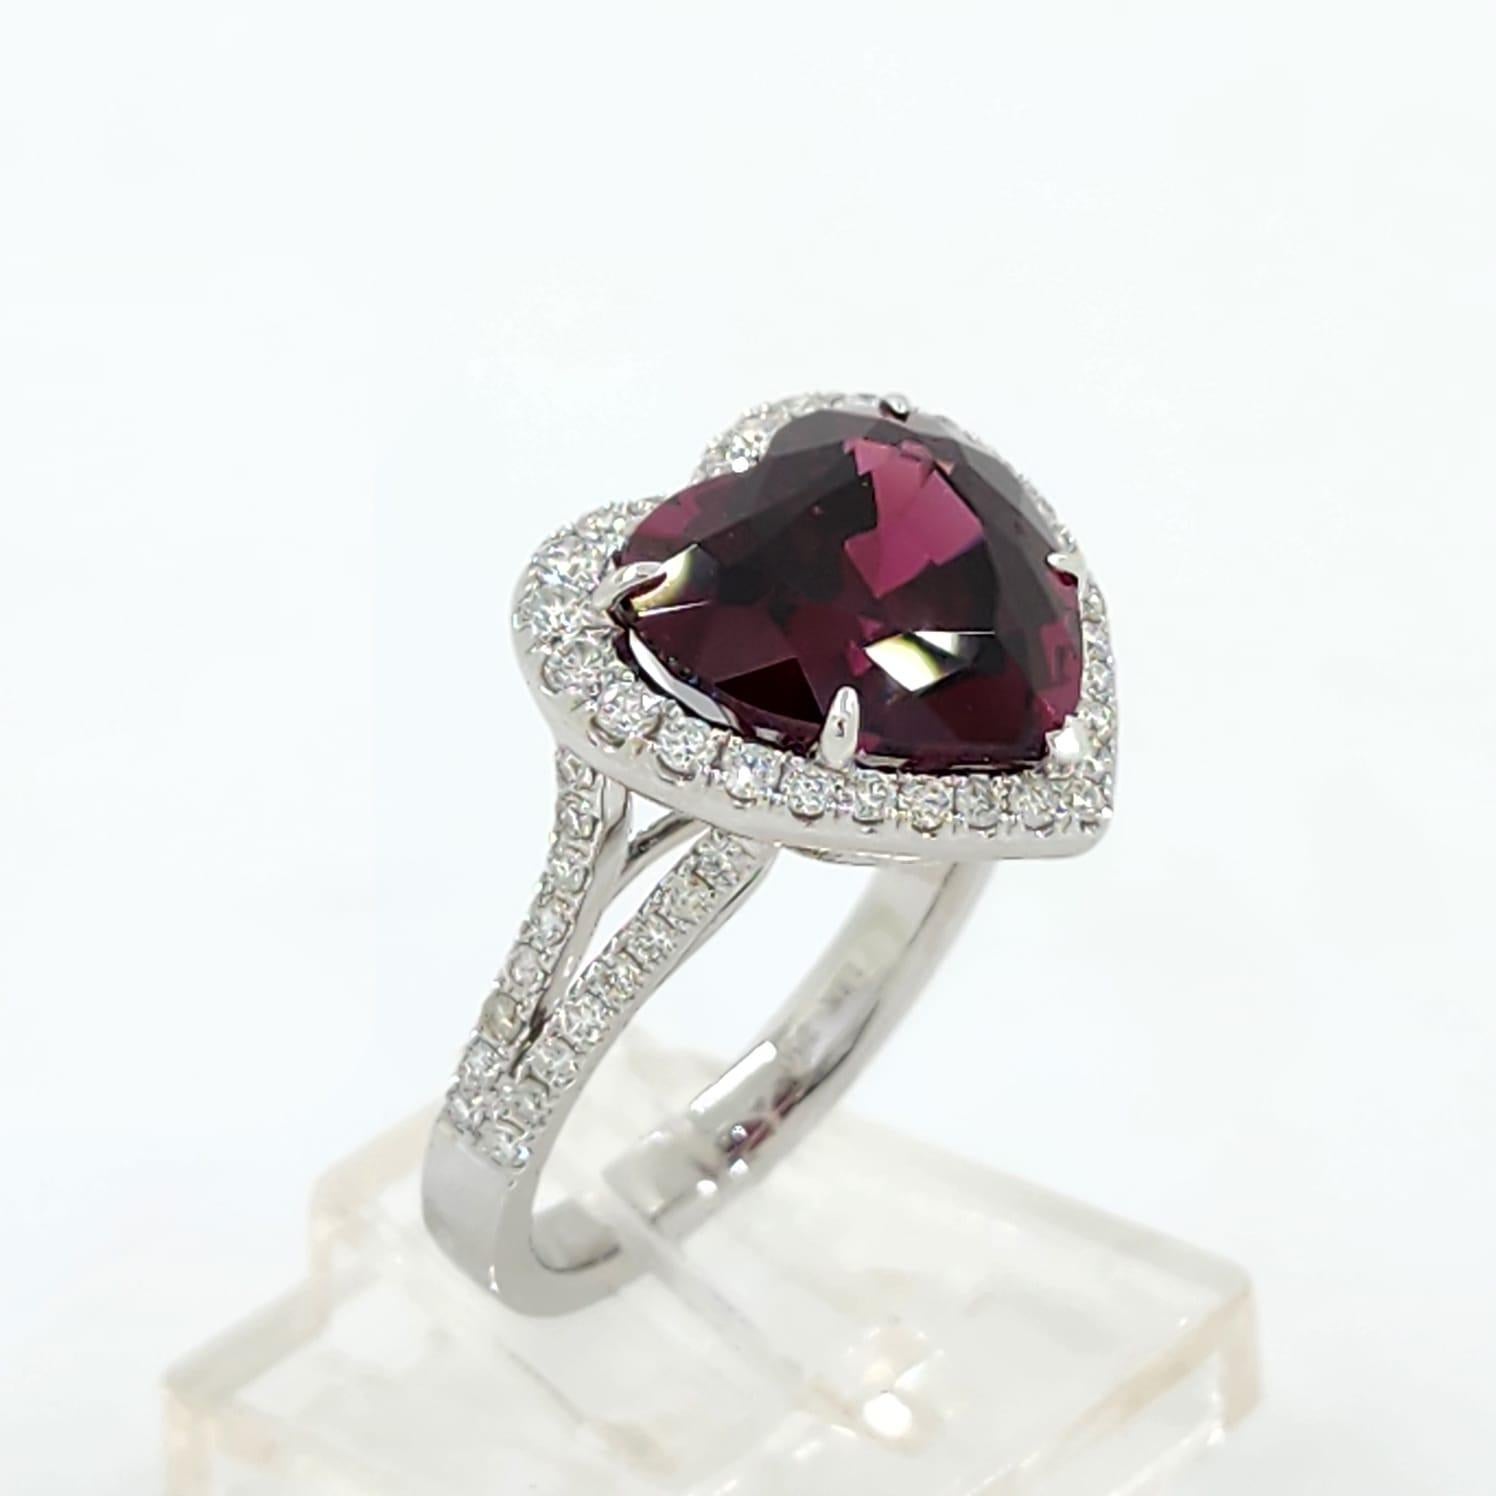 GIA Certified 7.37 Carat Heart Garnet and Diamond Ring in 18K White Gold For Sale 1